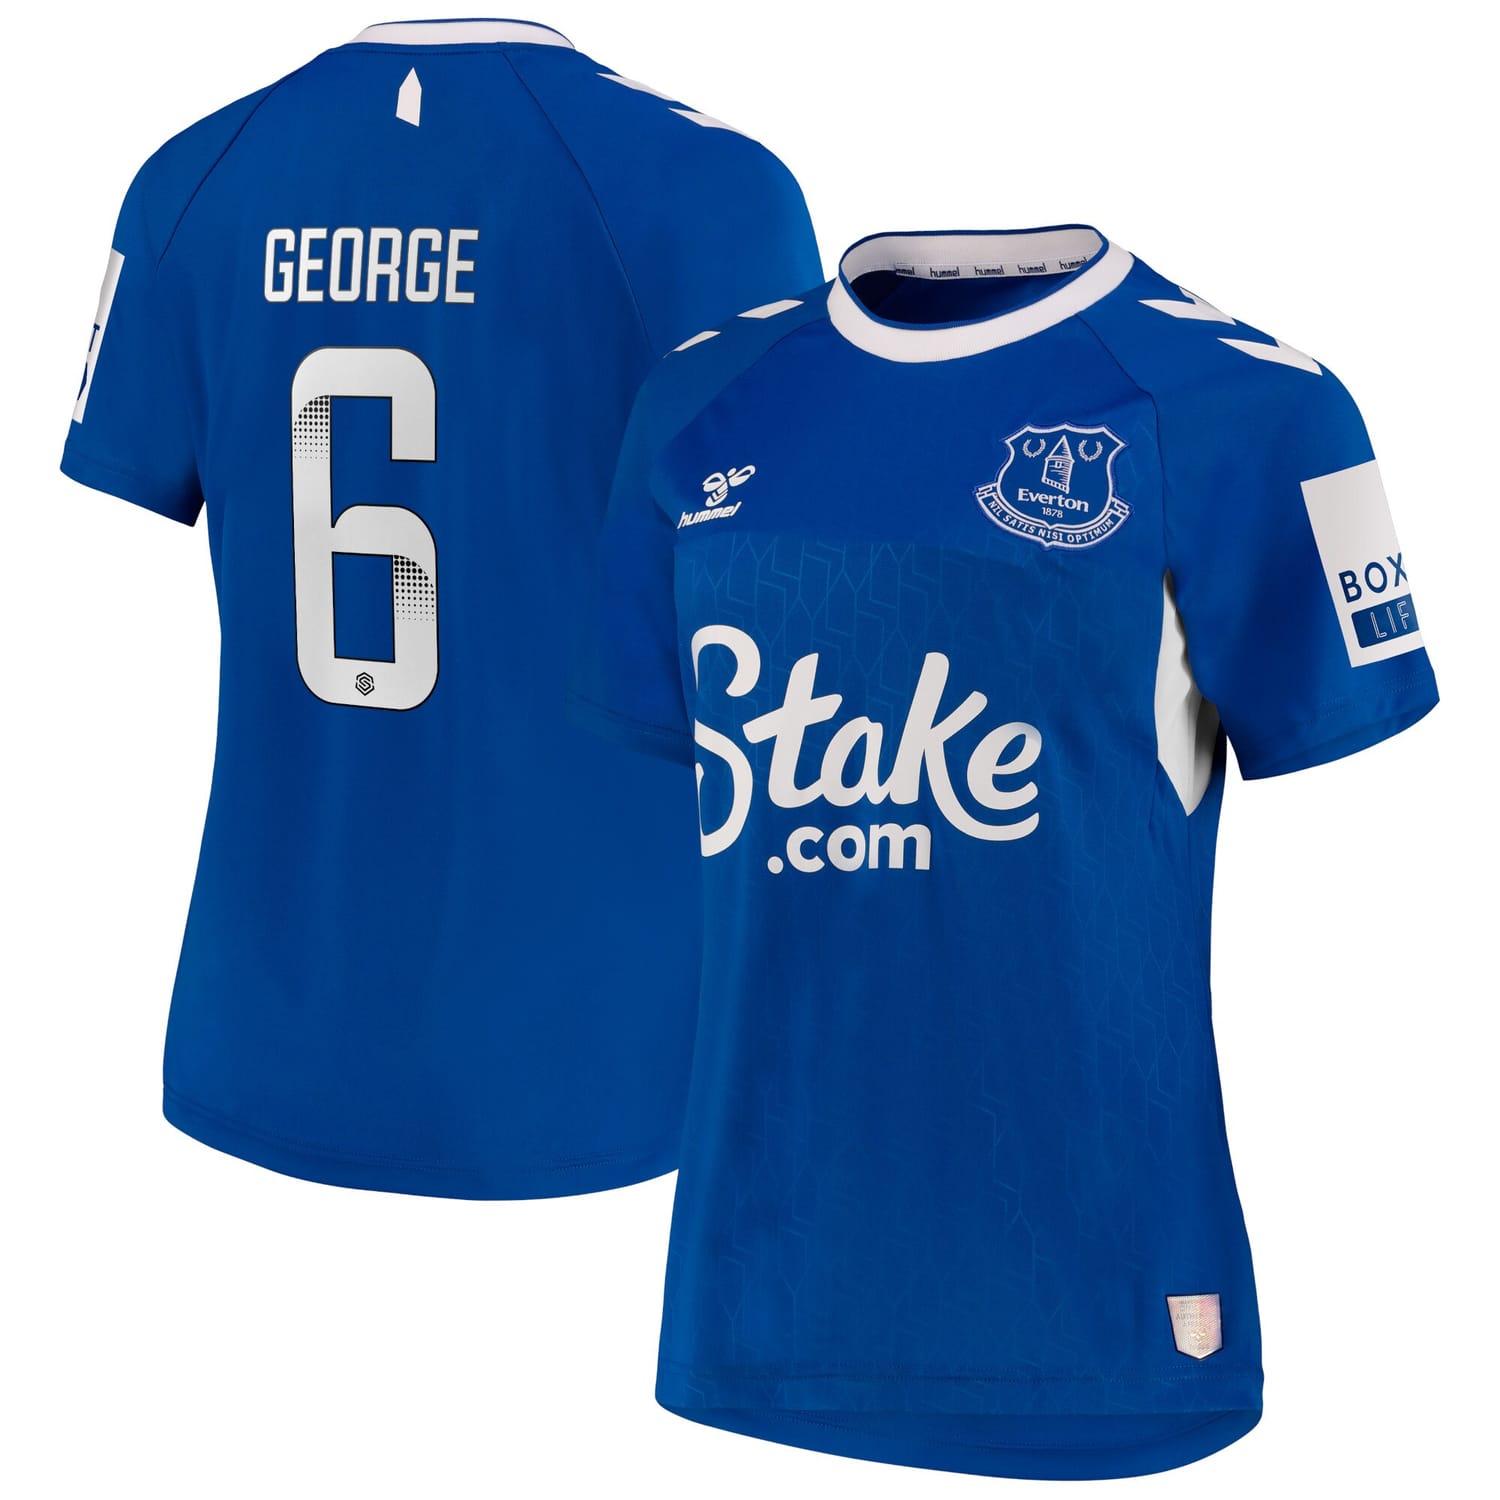 Premier League Everton Home WSL Jersey Shirt 2022-23 player Gabrielle George 6 printing for Women